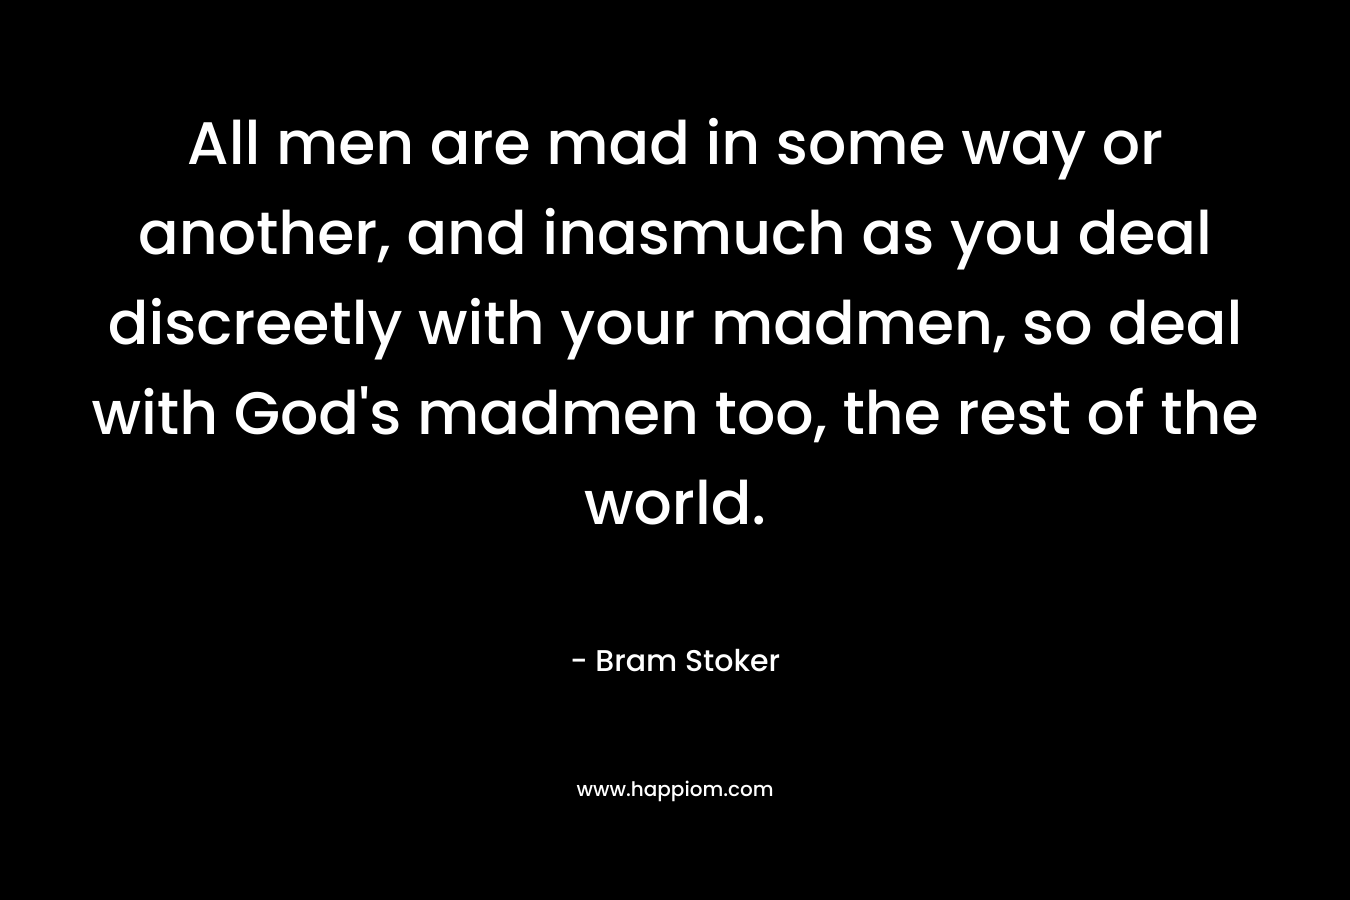 All men are mad in some way or another, and inasmuch as you deal discreetly with your madmen, so deal with God’s madmen too, the rest of the world. – Bram Stoker